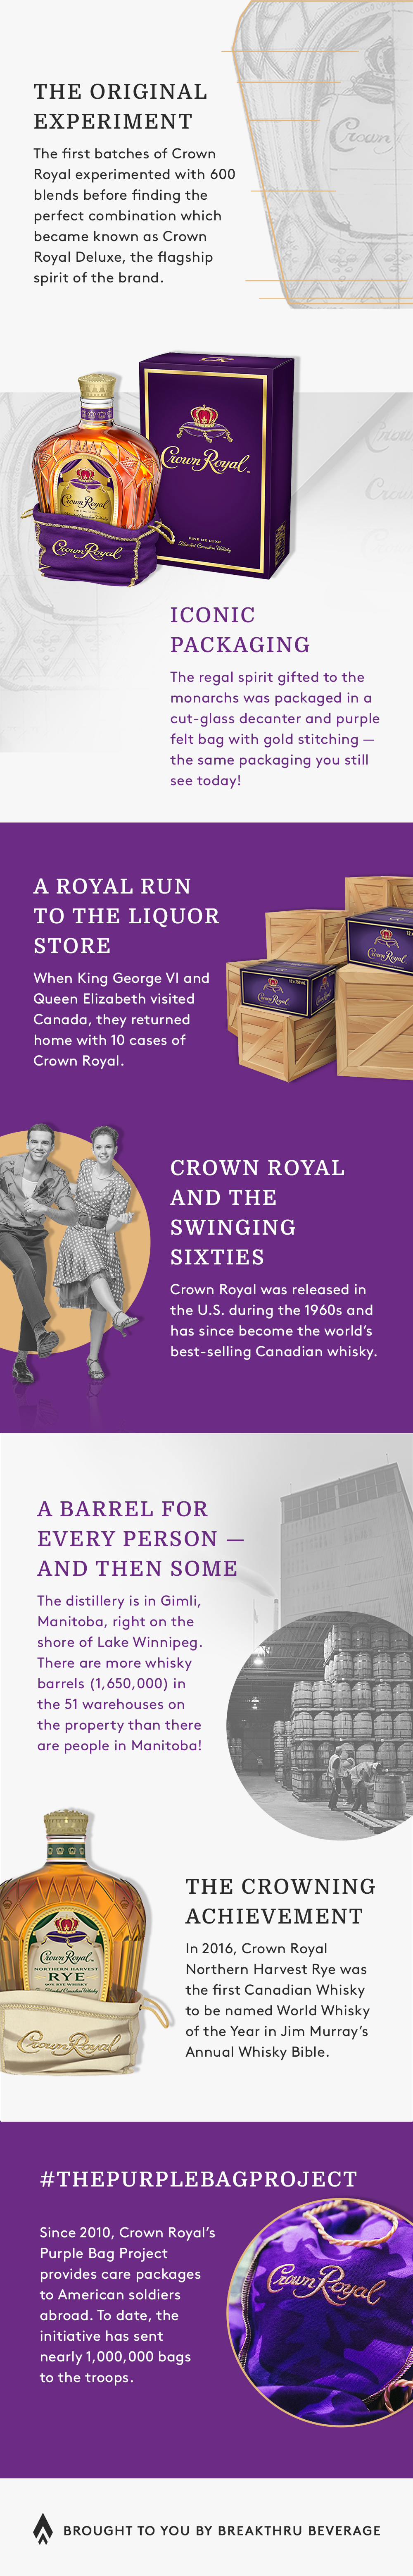 SYTYK Crown Royal Infographic